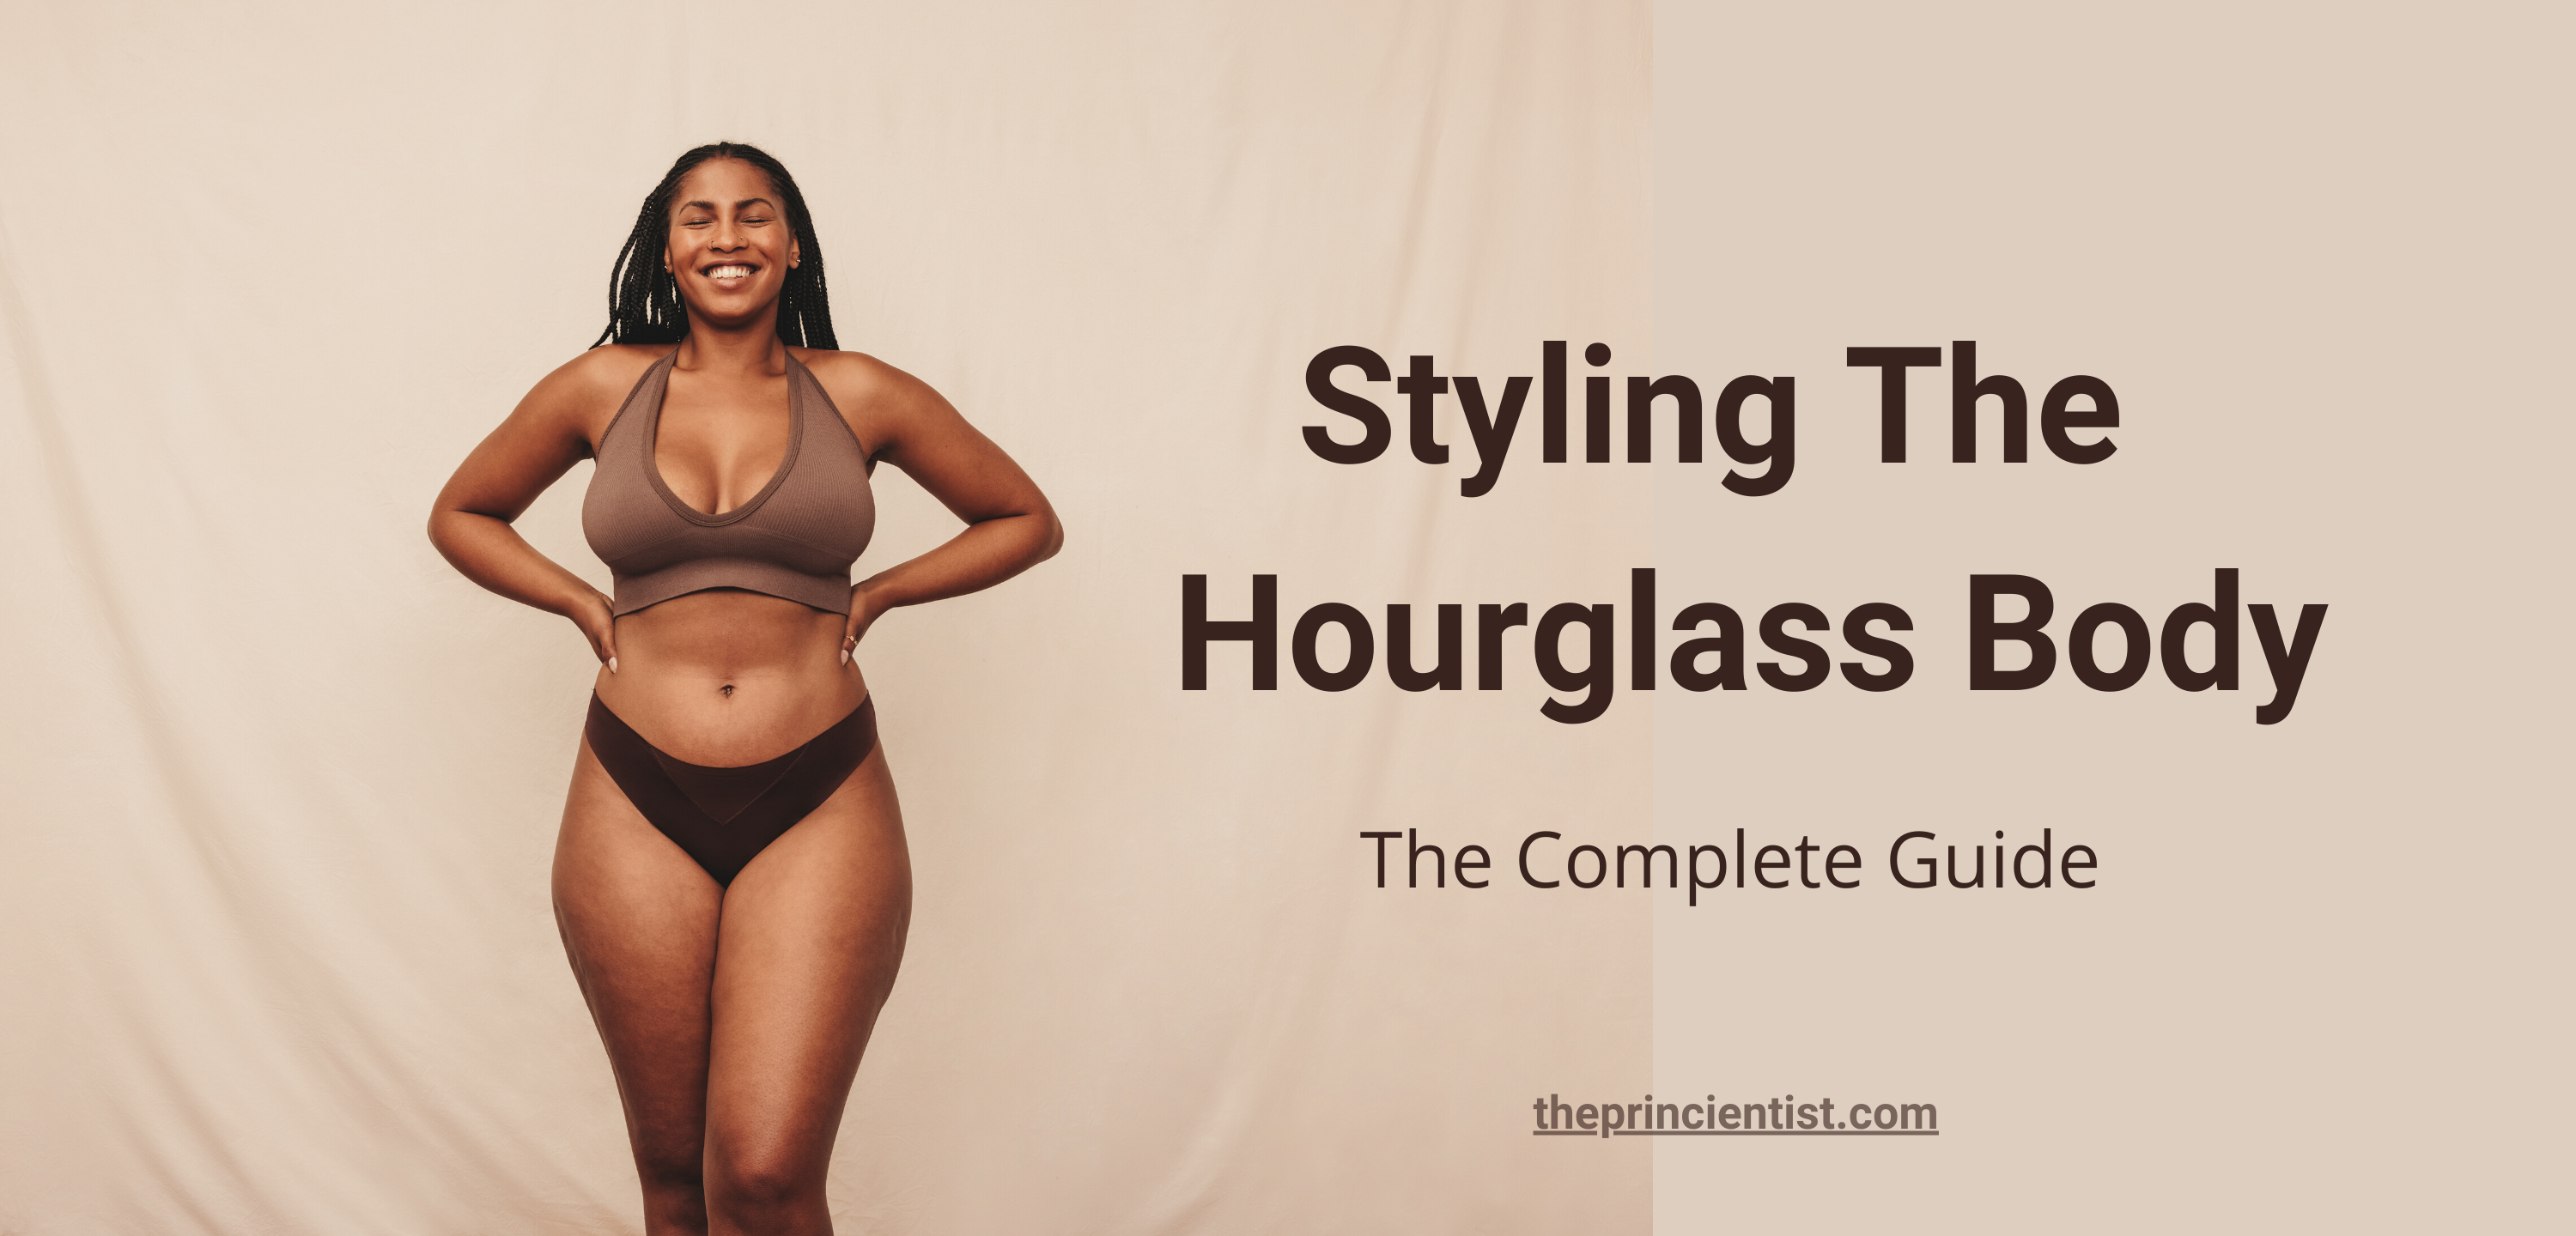 How to Attain an Hourglass Figure